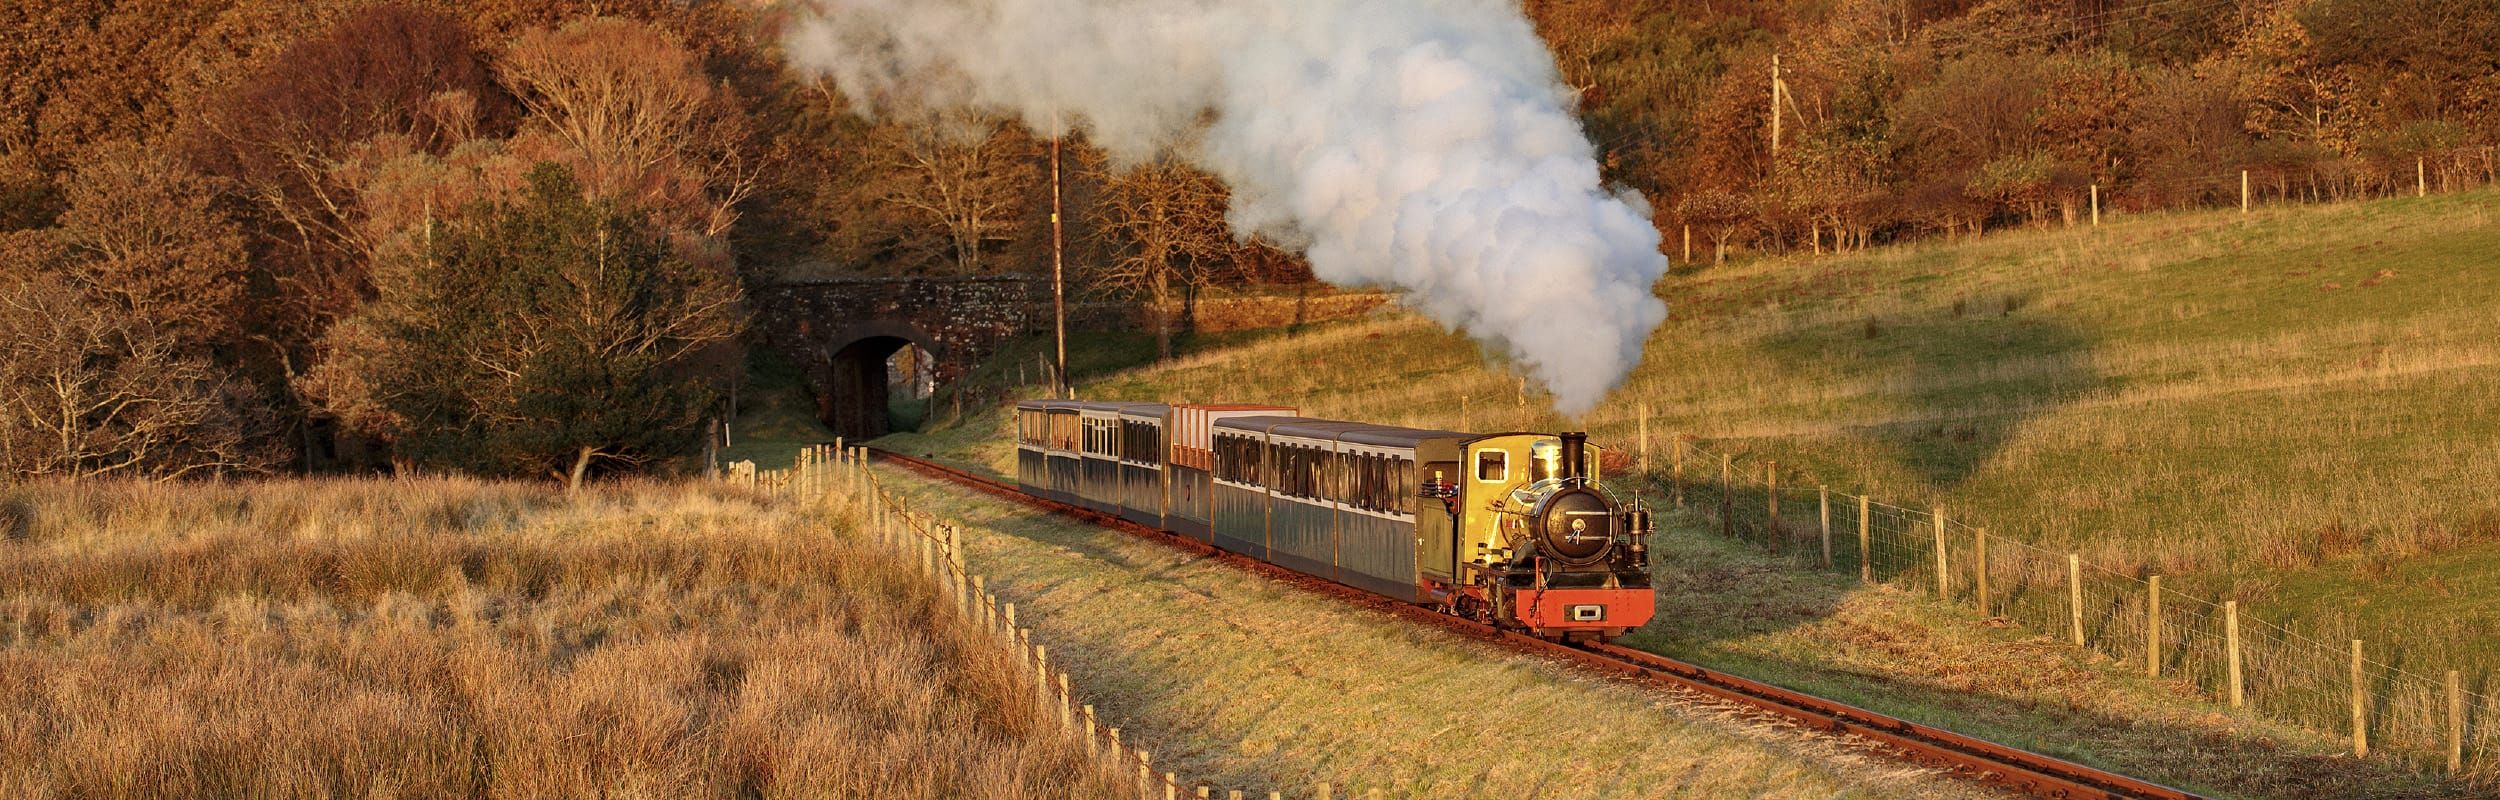 Heritage engine Northern Rock hauling a train on the Ravenglass and Eskdale railway in the Autumn